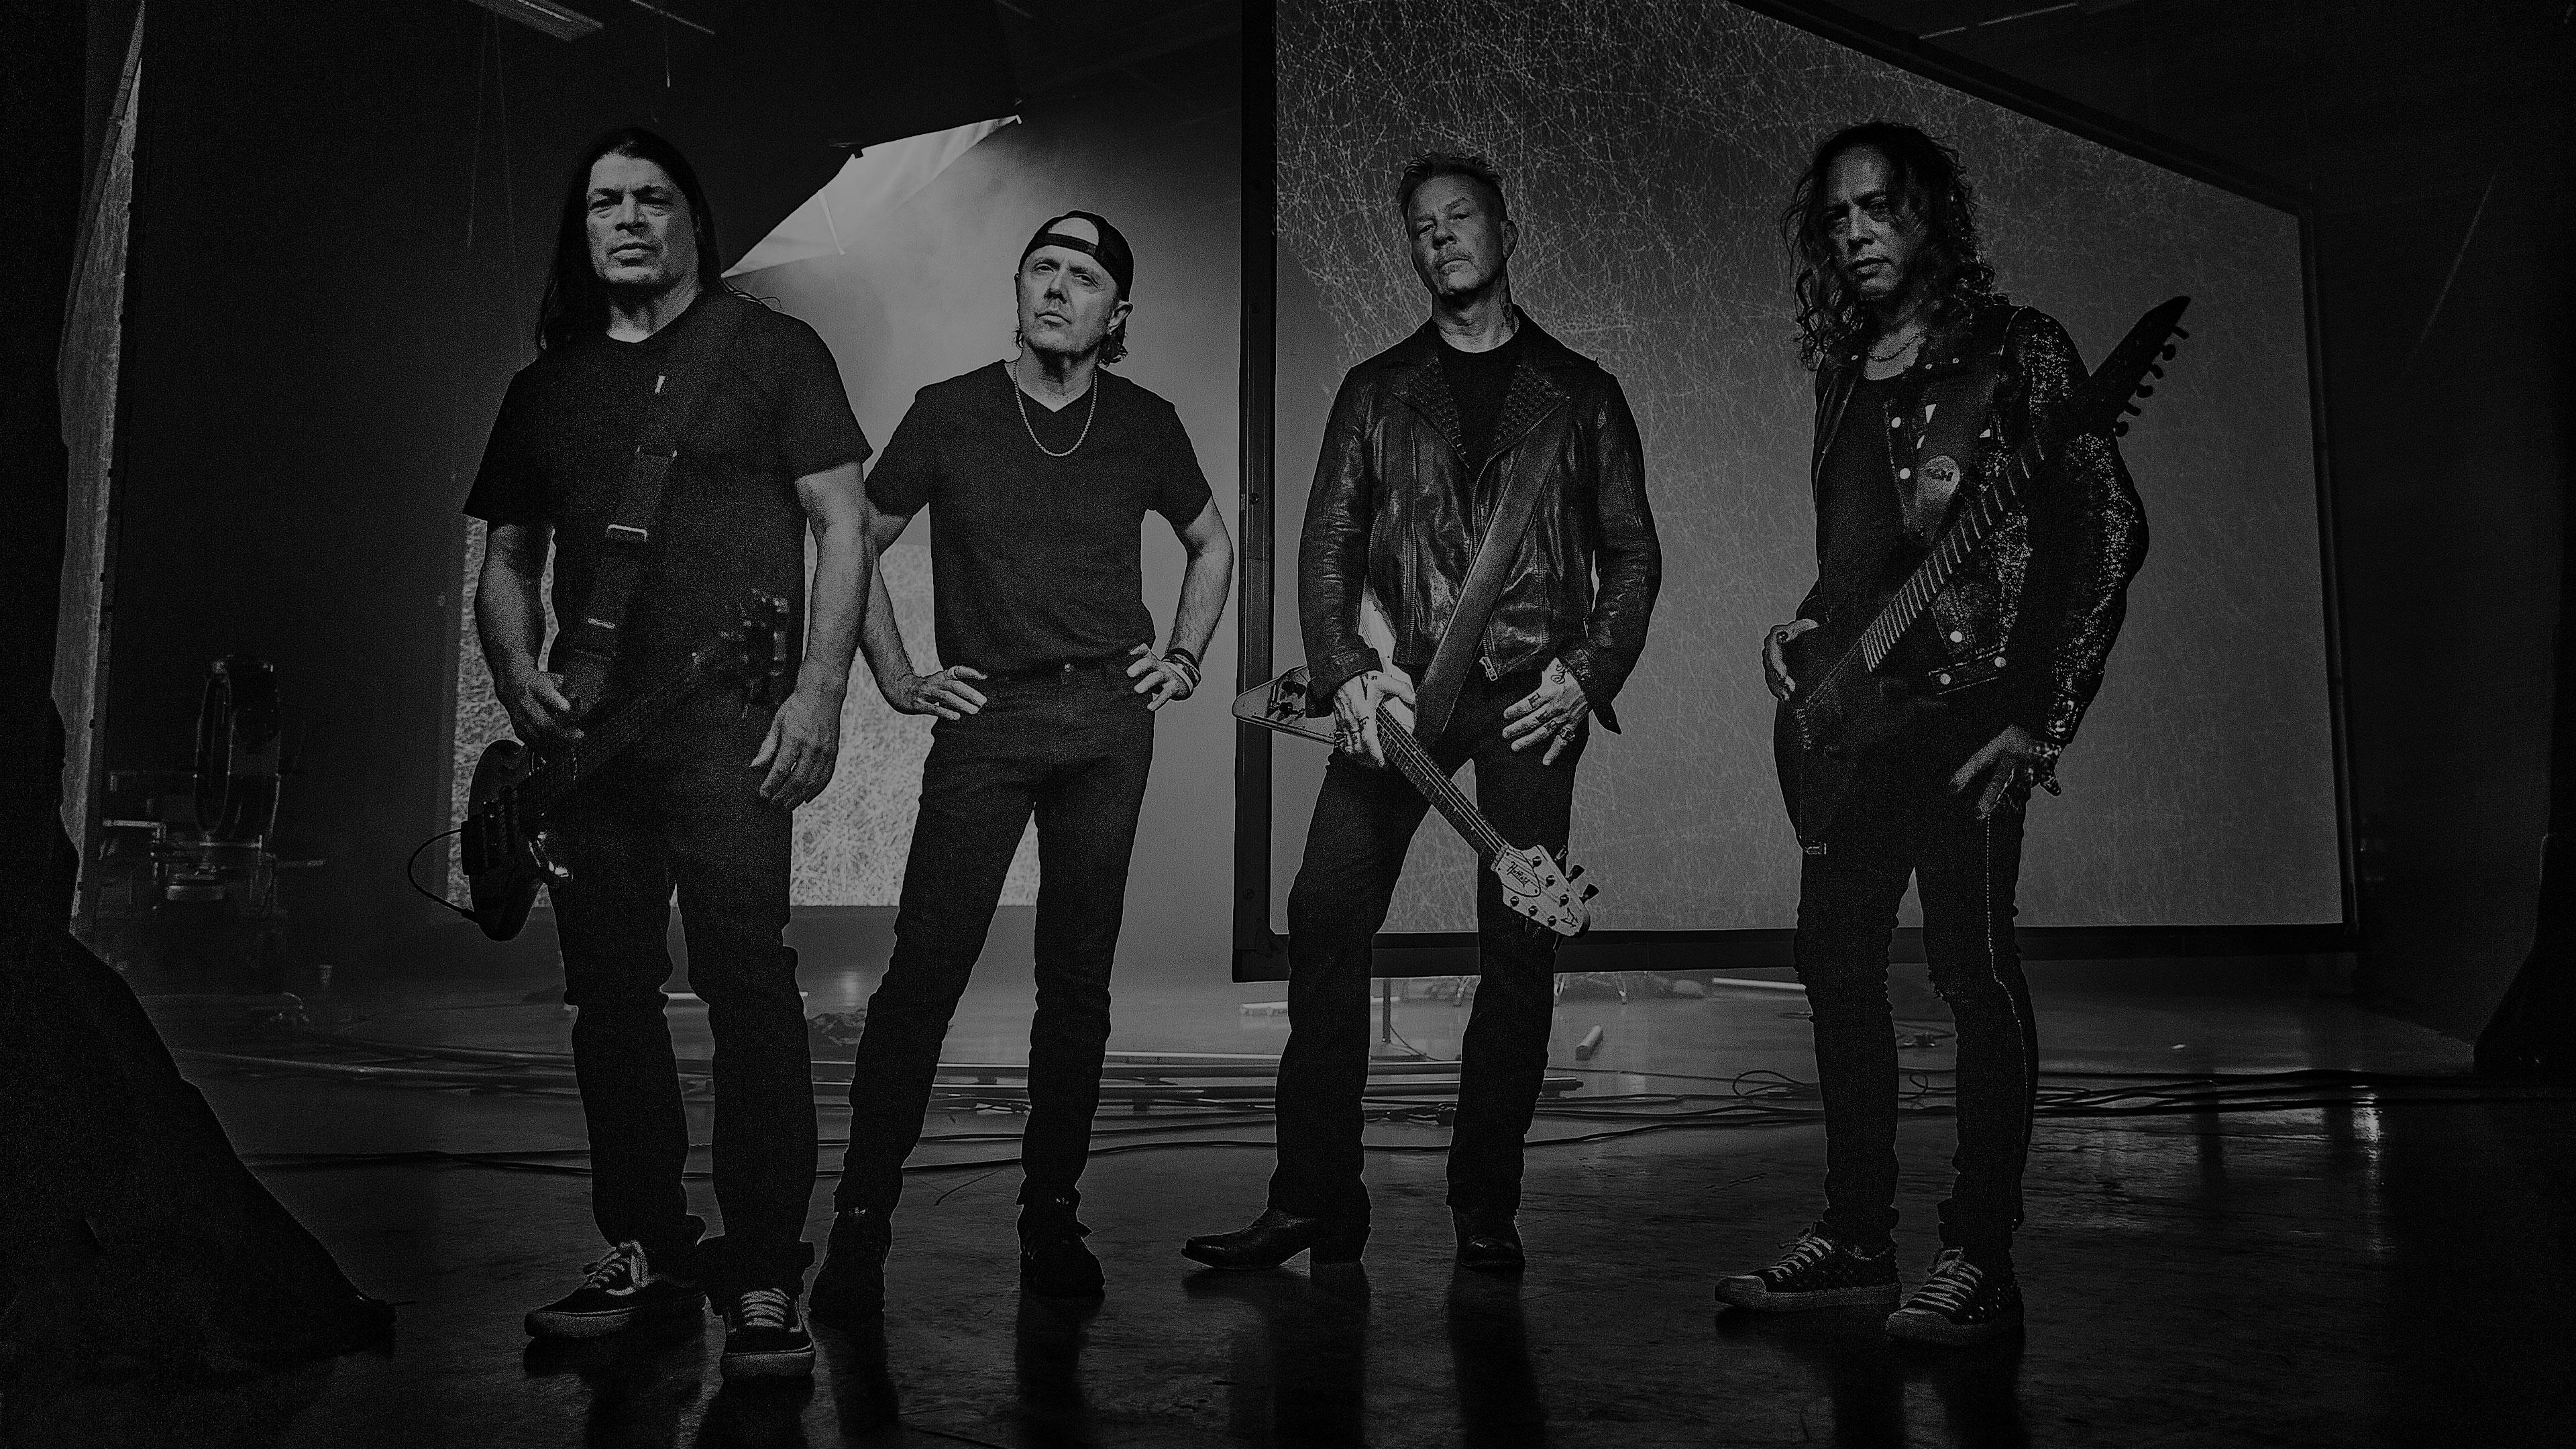 Banner Image for the Metallica song "The Other New Song"